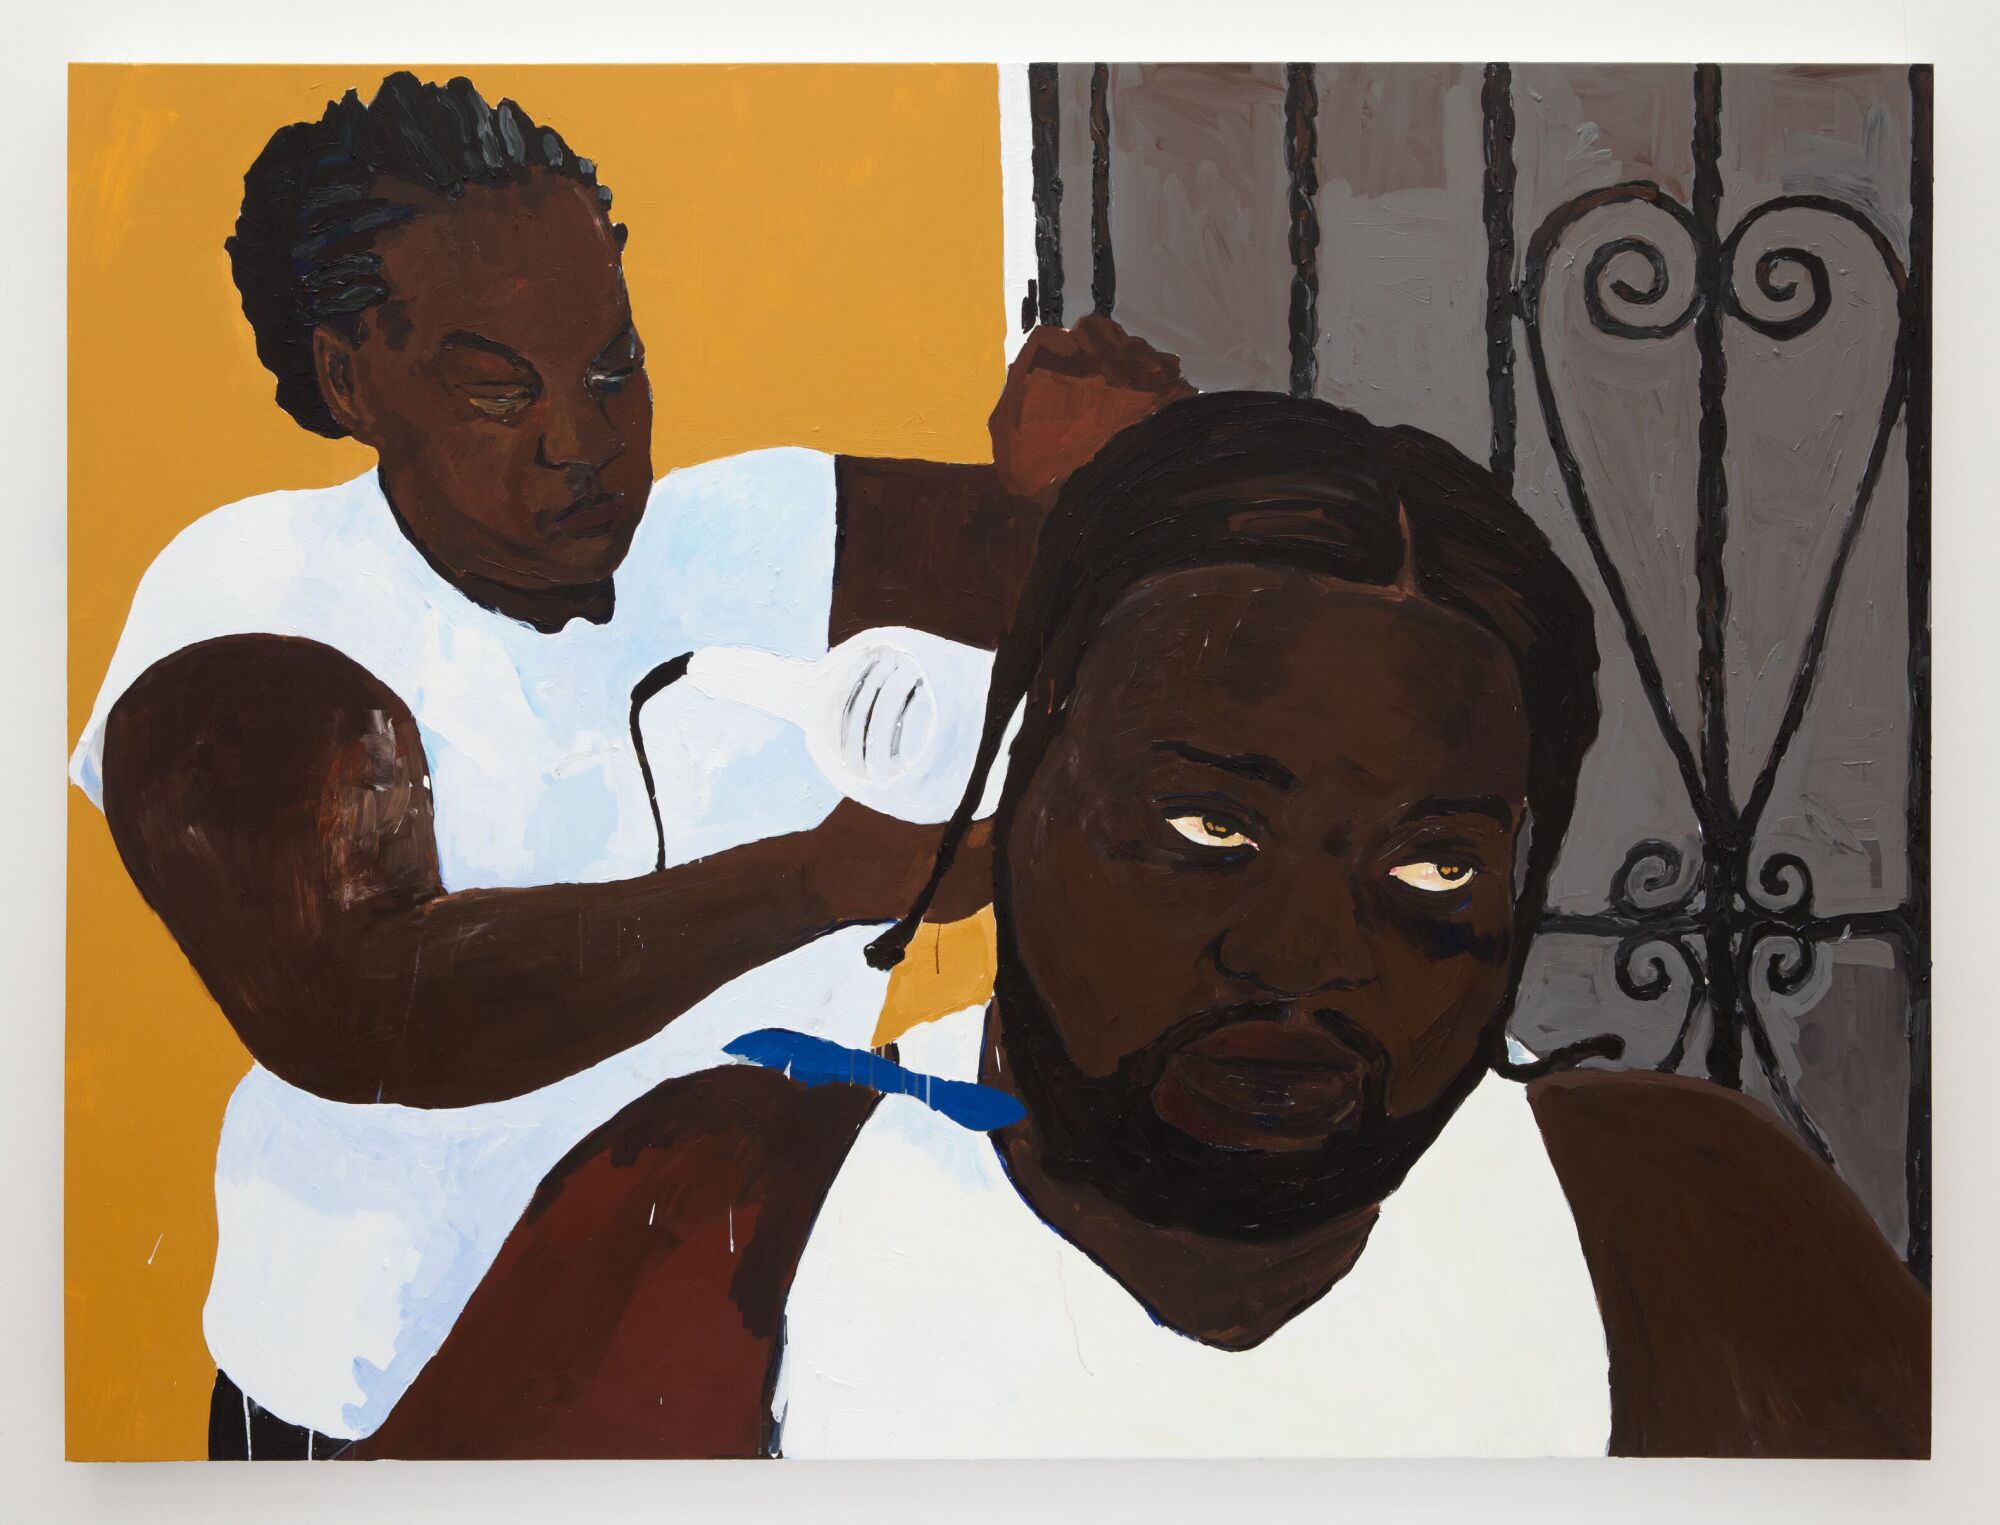 A painting of a man getting his hair done